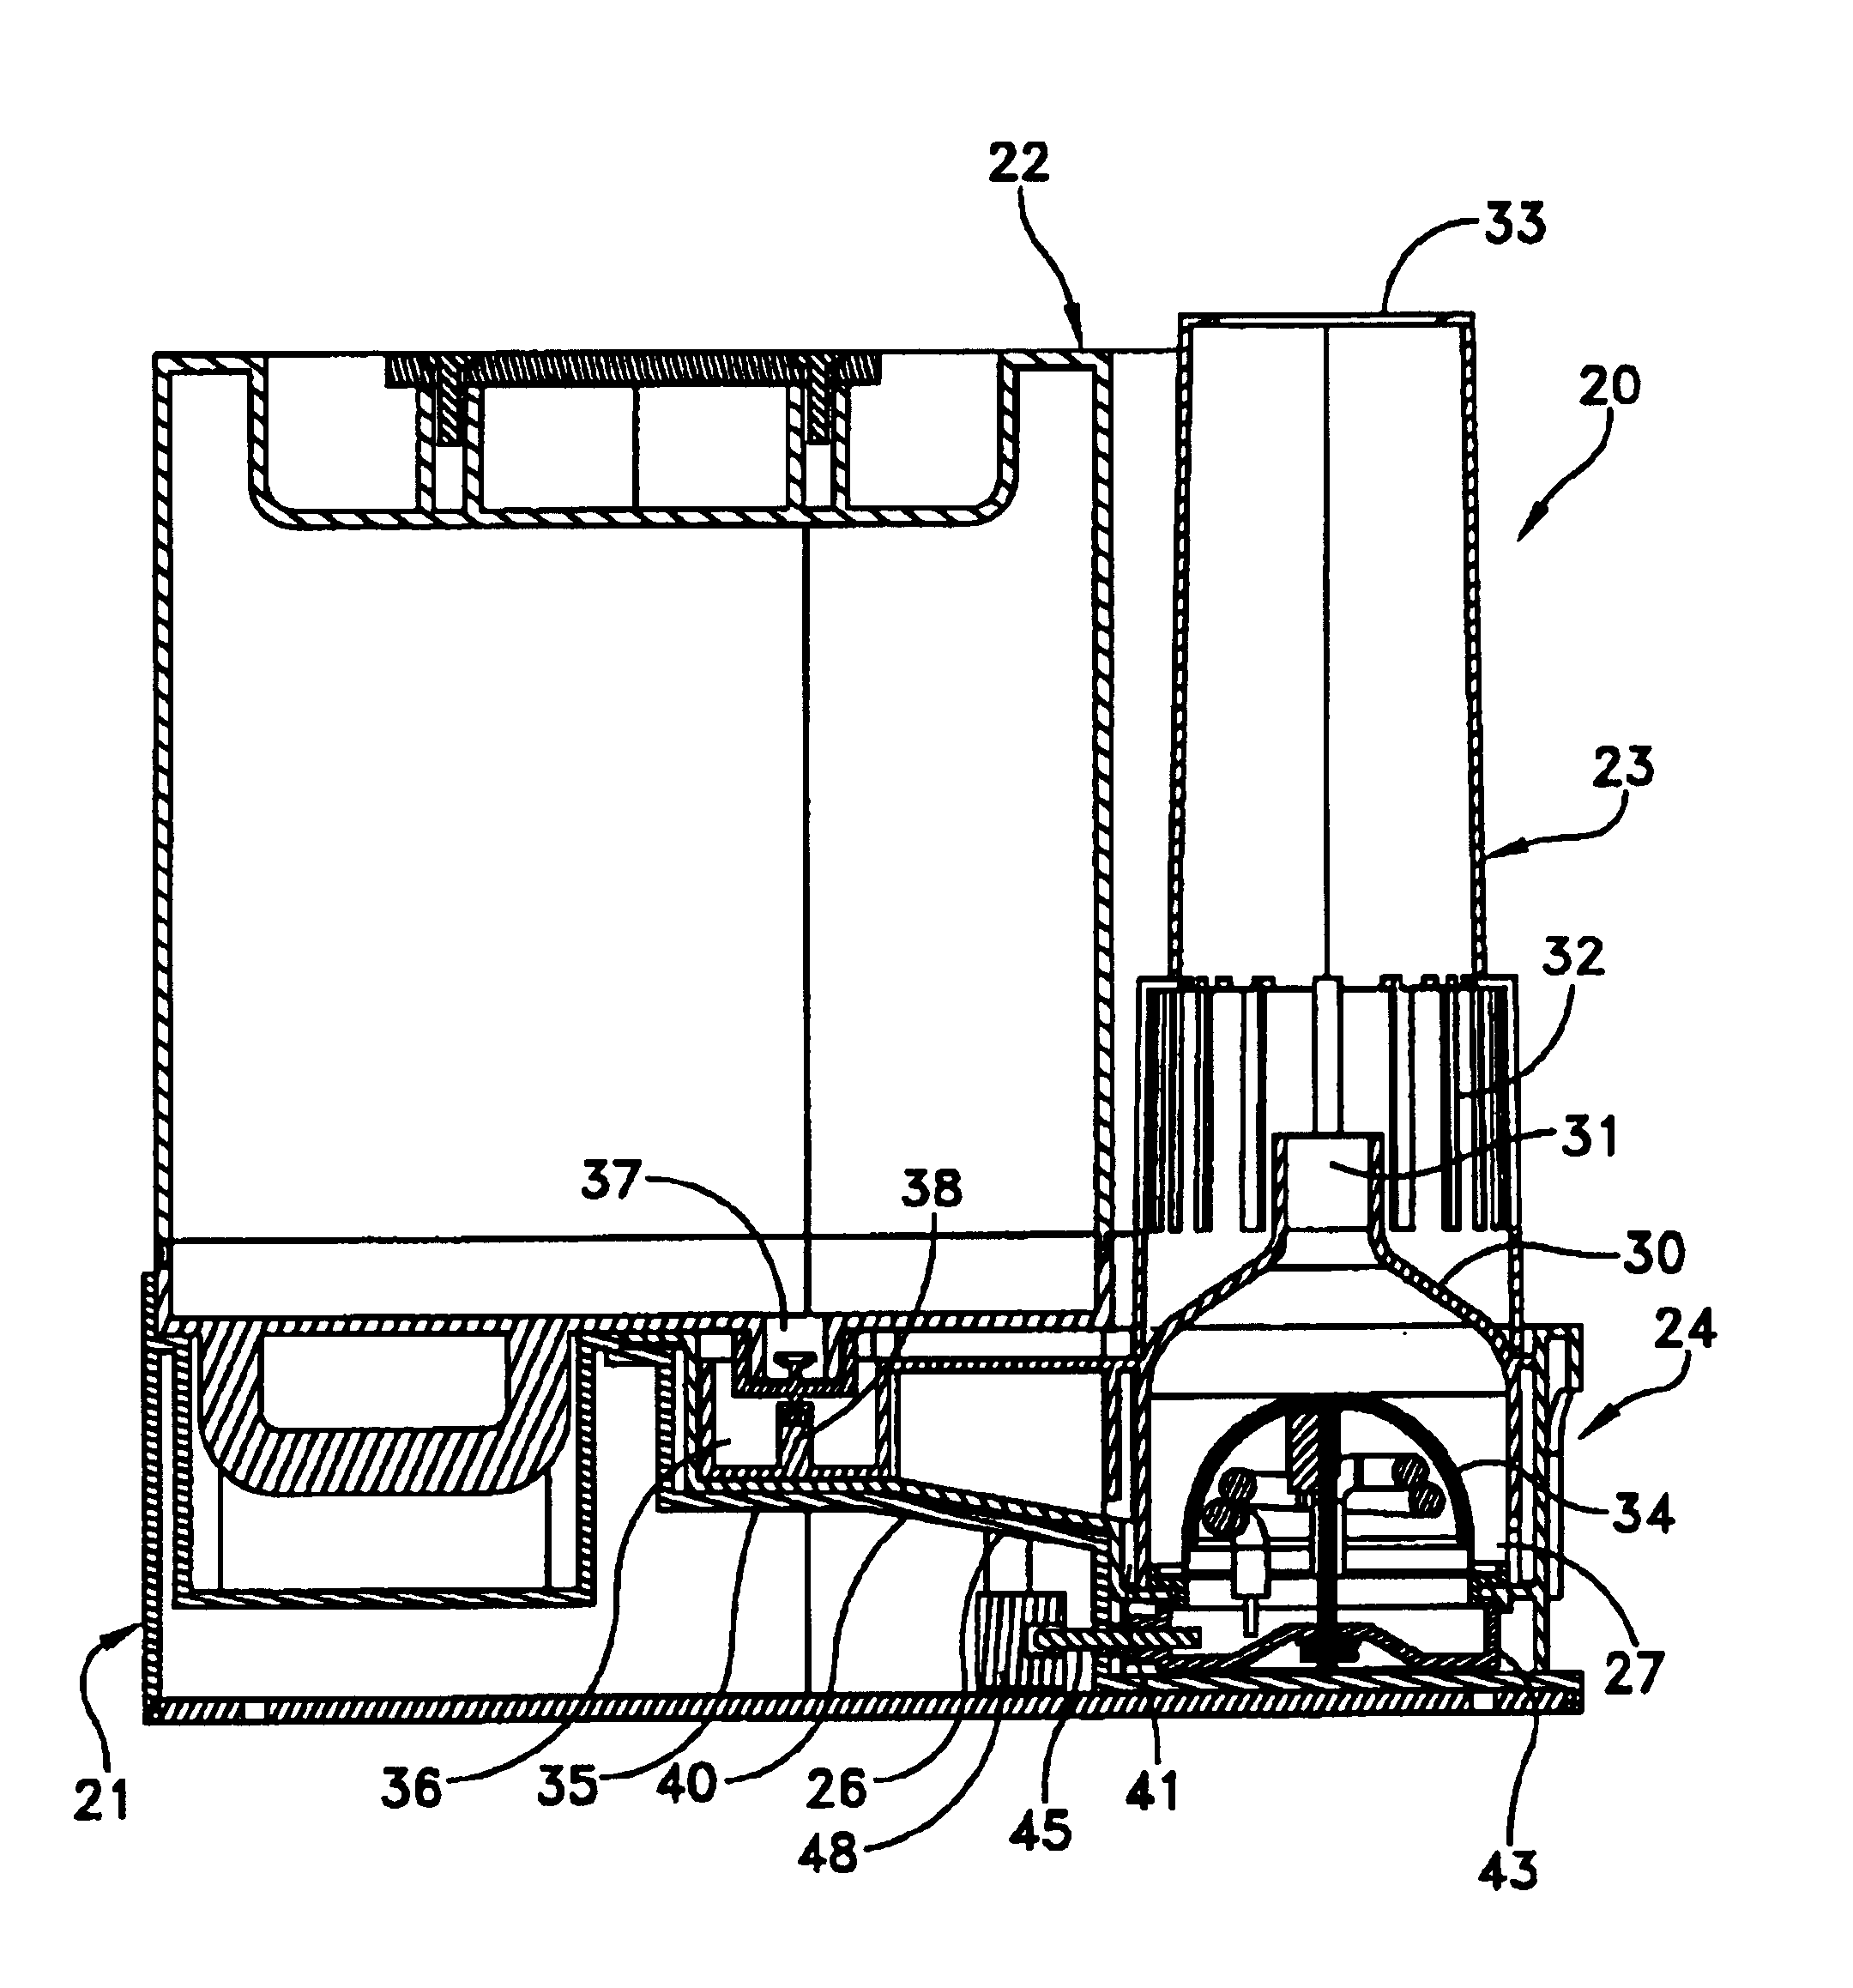 Apparatus for conditioning air